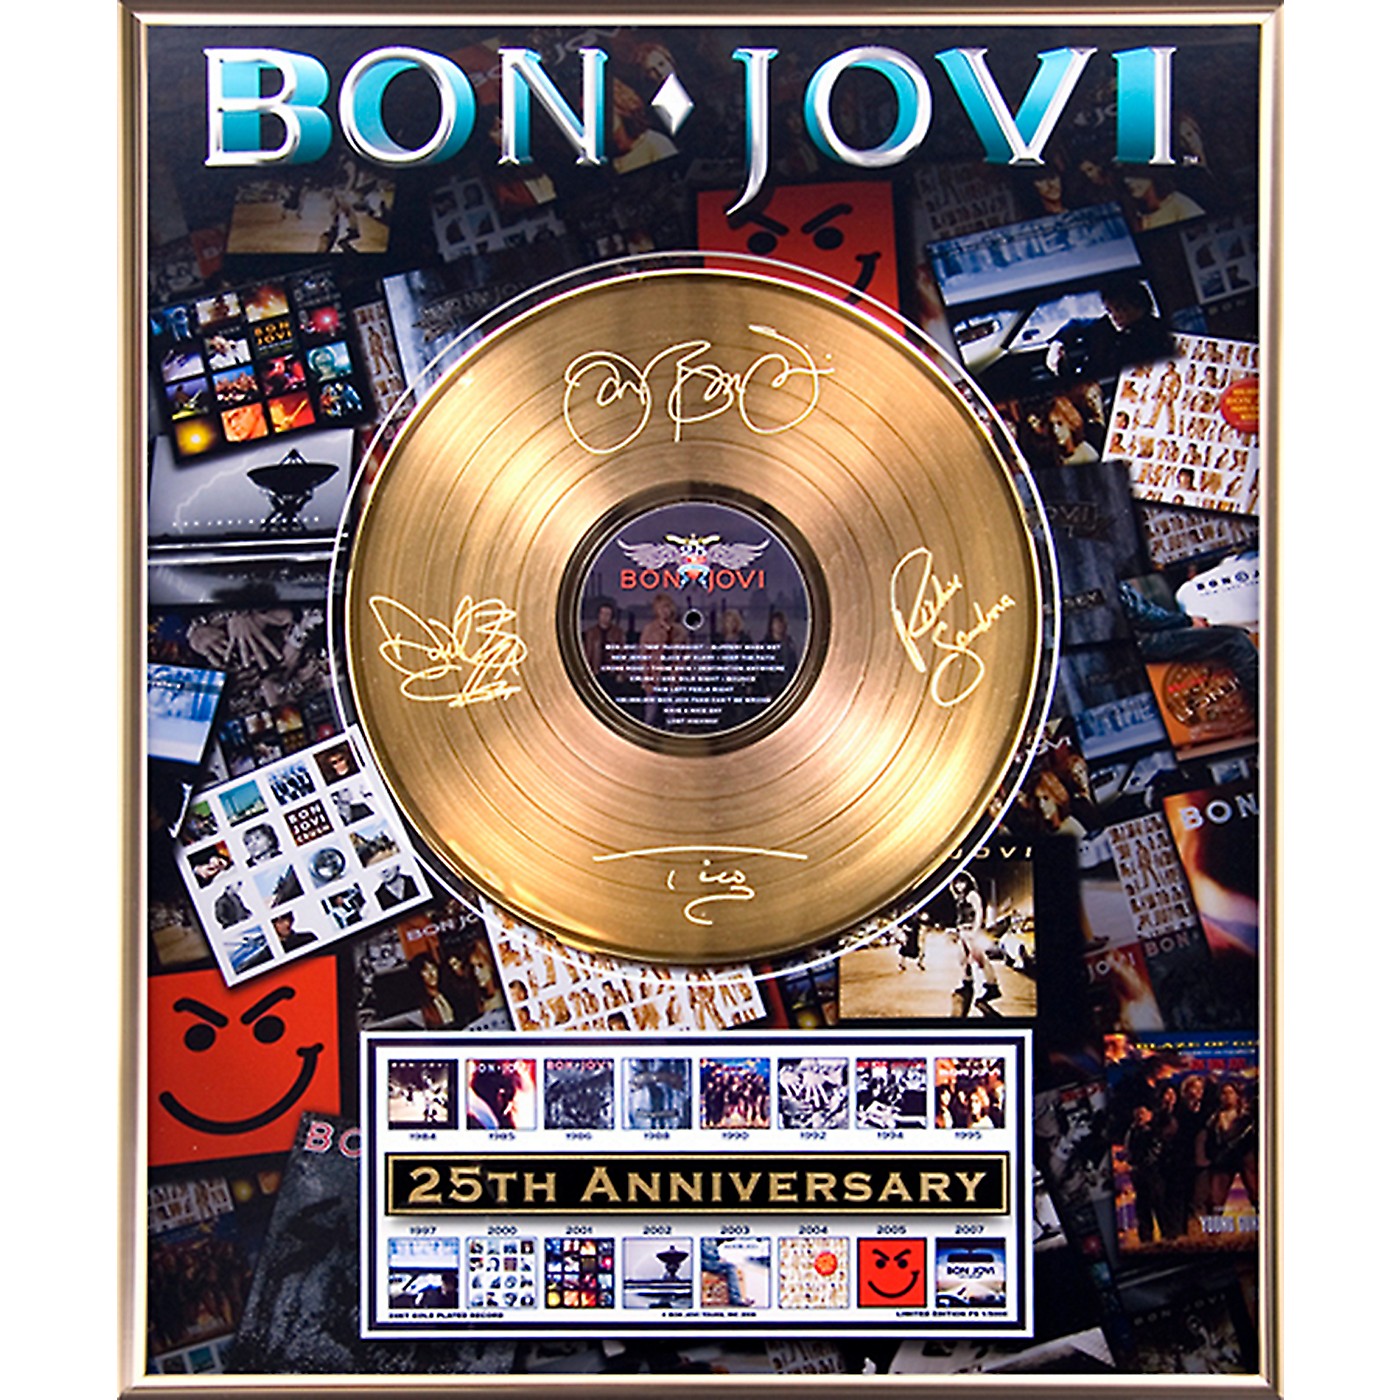 24 Kt. Gold Records Bon Jovi 25th Anniversary Gold LP Limited Edition of 5000 Woodwind